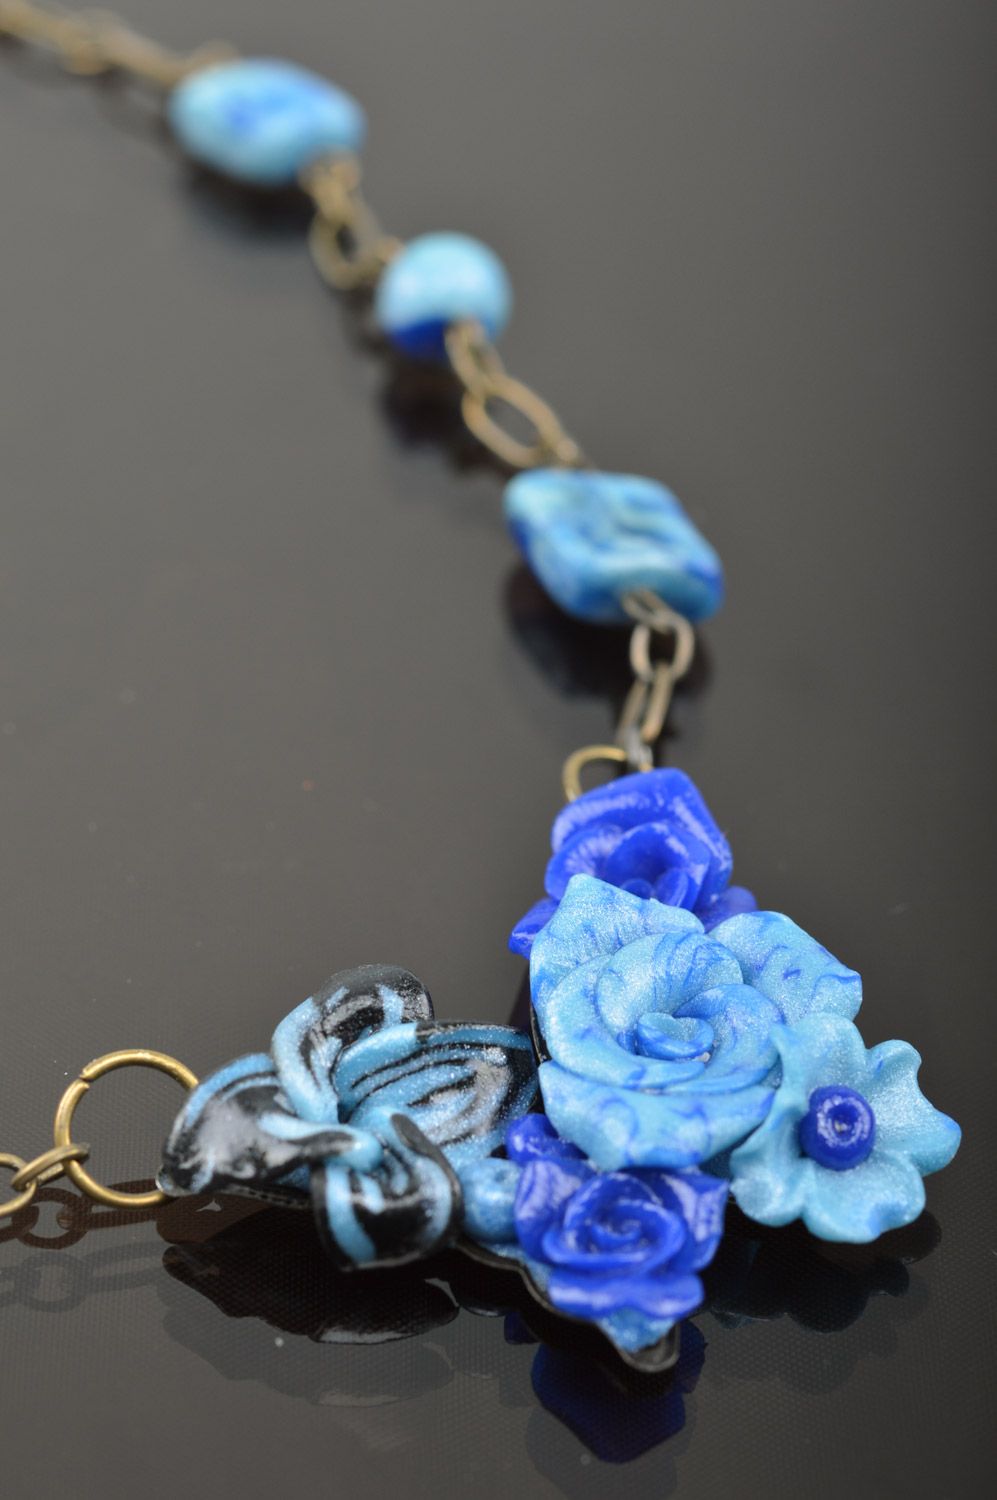 Homemade polymer clay flower necklace with metal chain photo 3